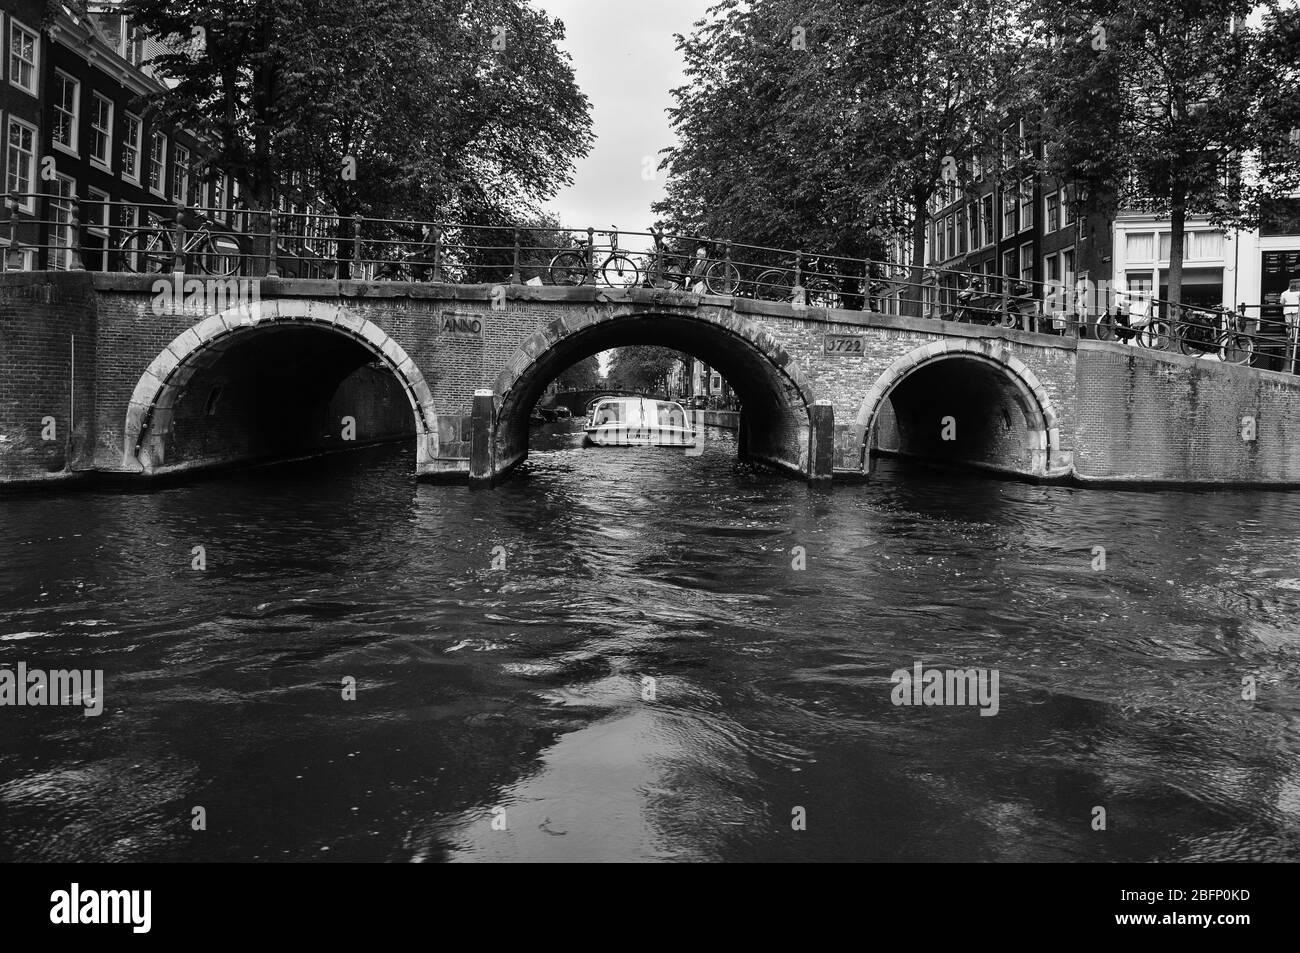 Canals and waterways of Amsterdam Stock Photo